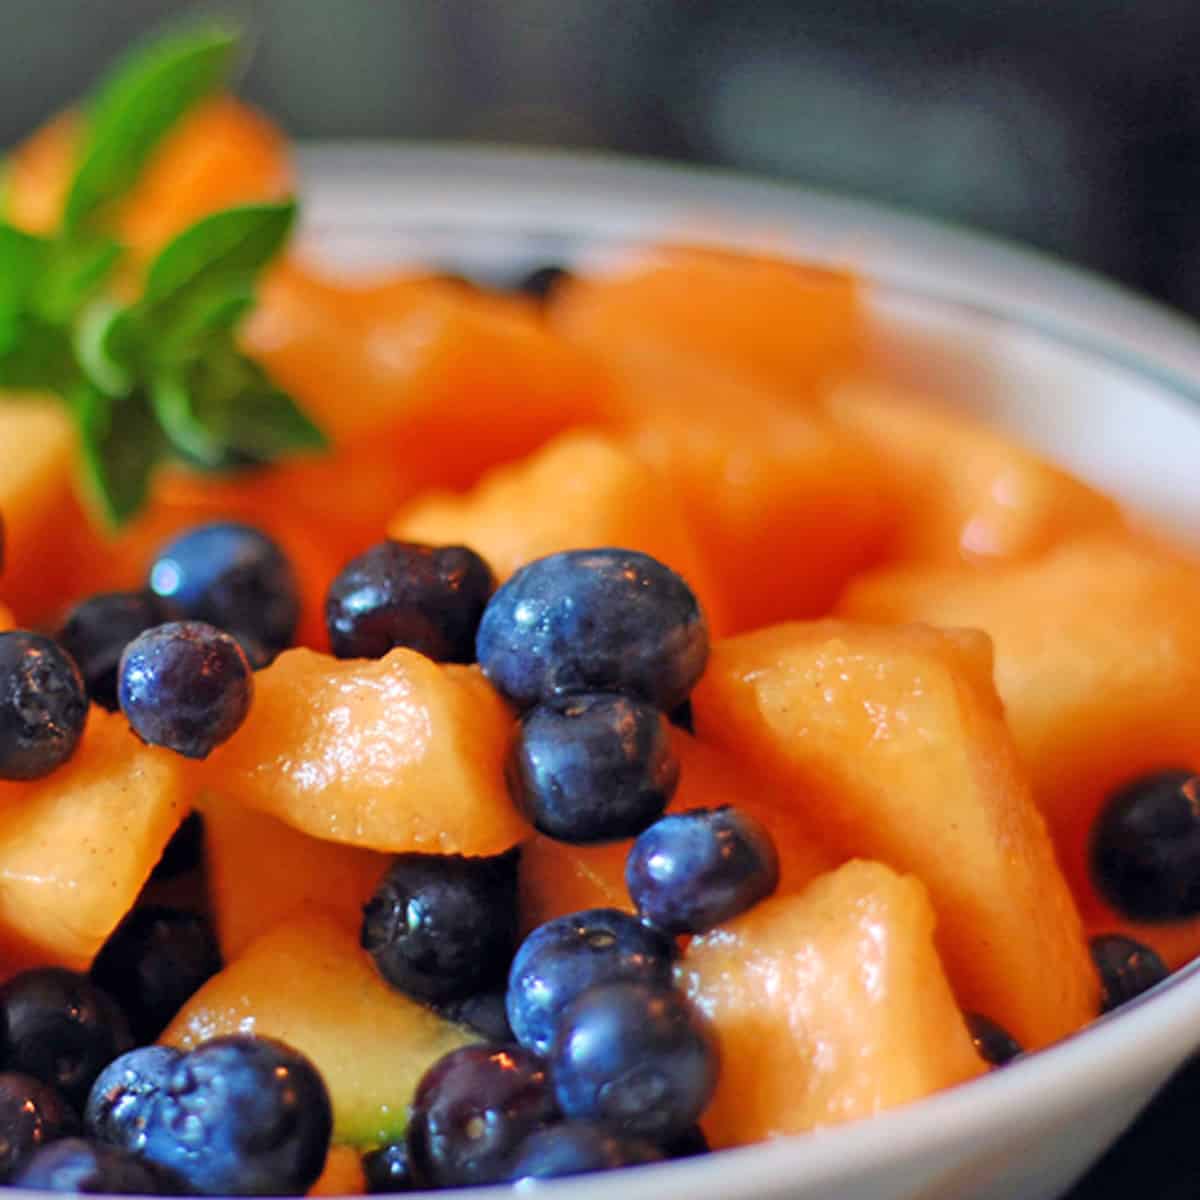 A bowl of blueberries and choped cantaloupe.